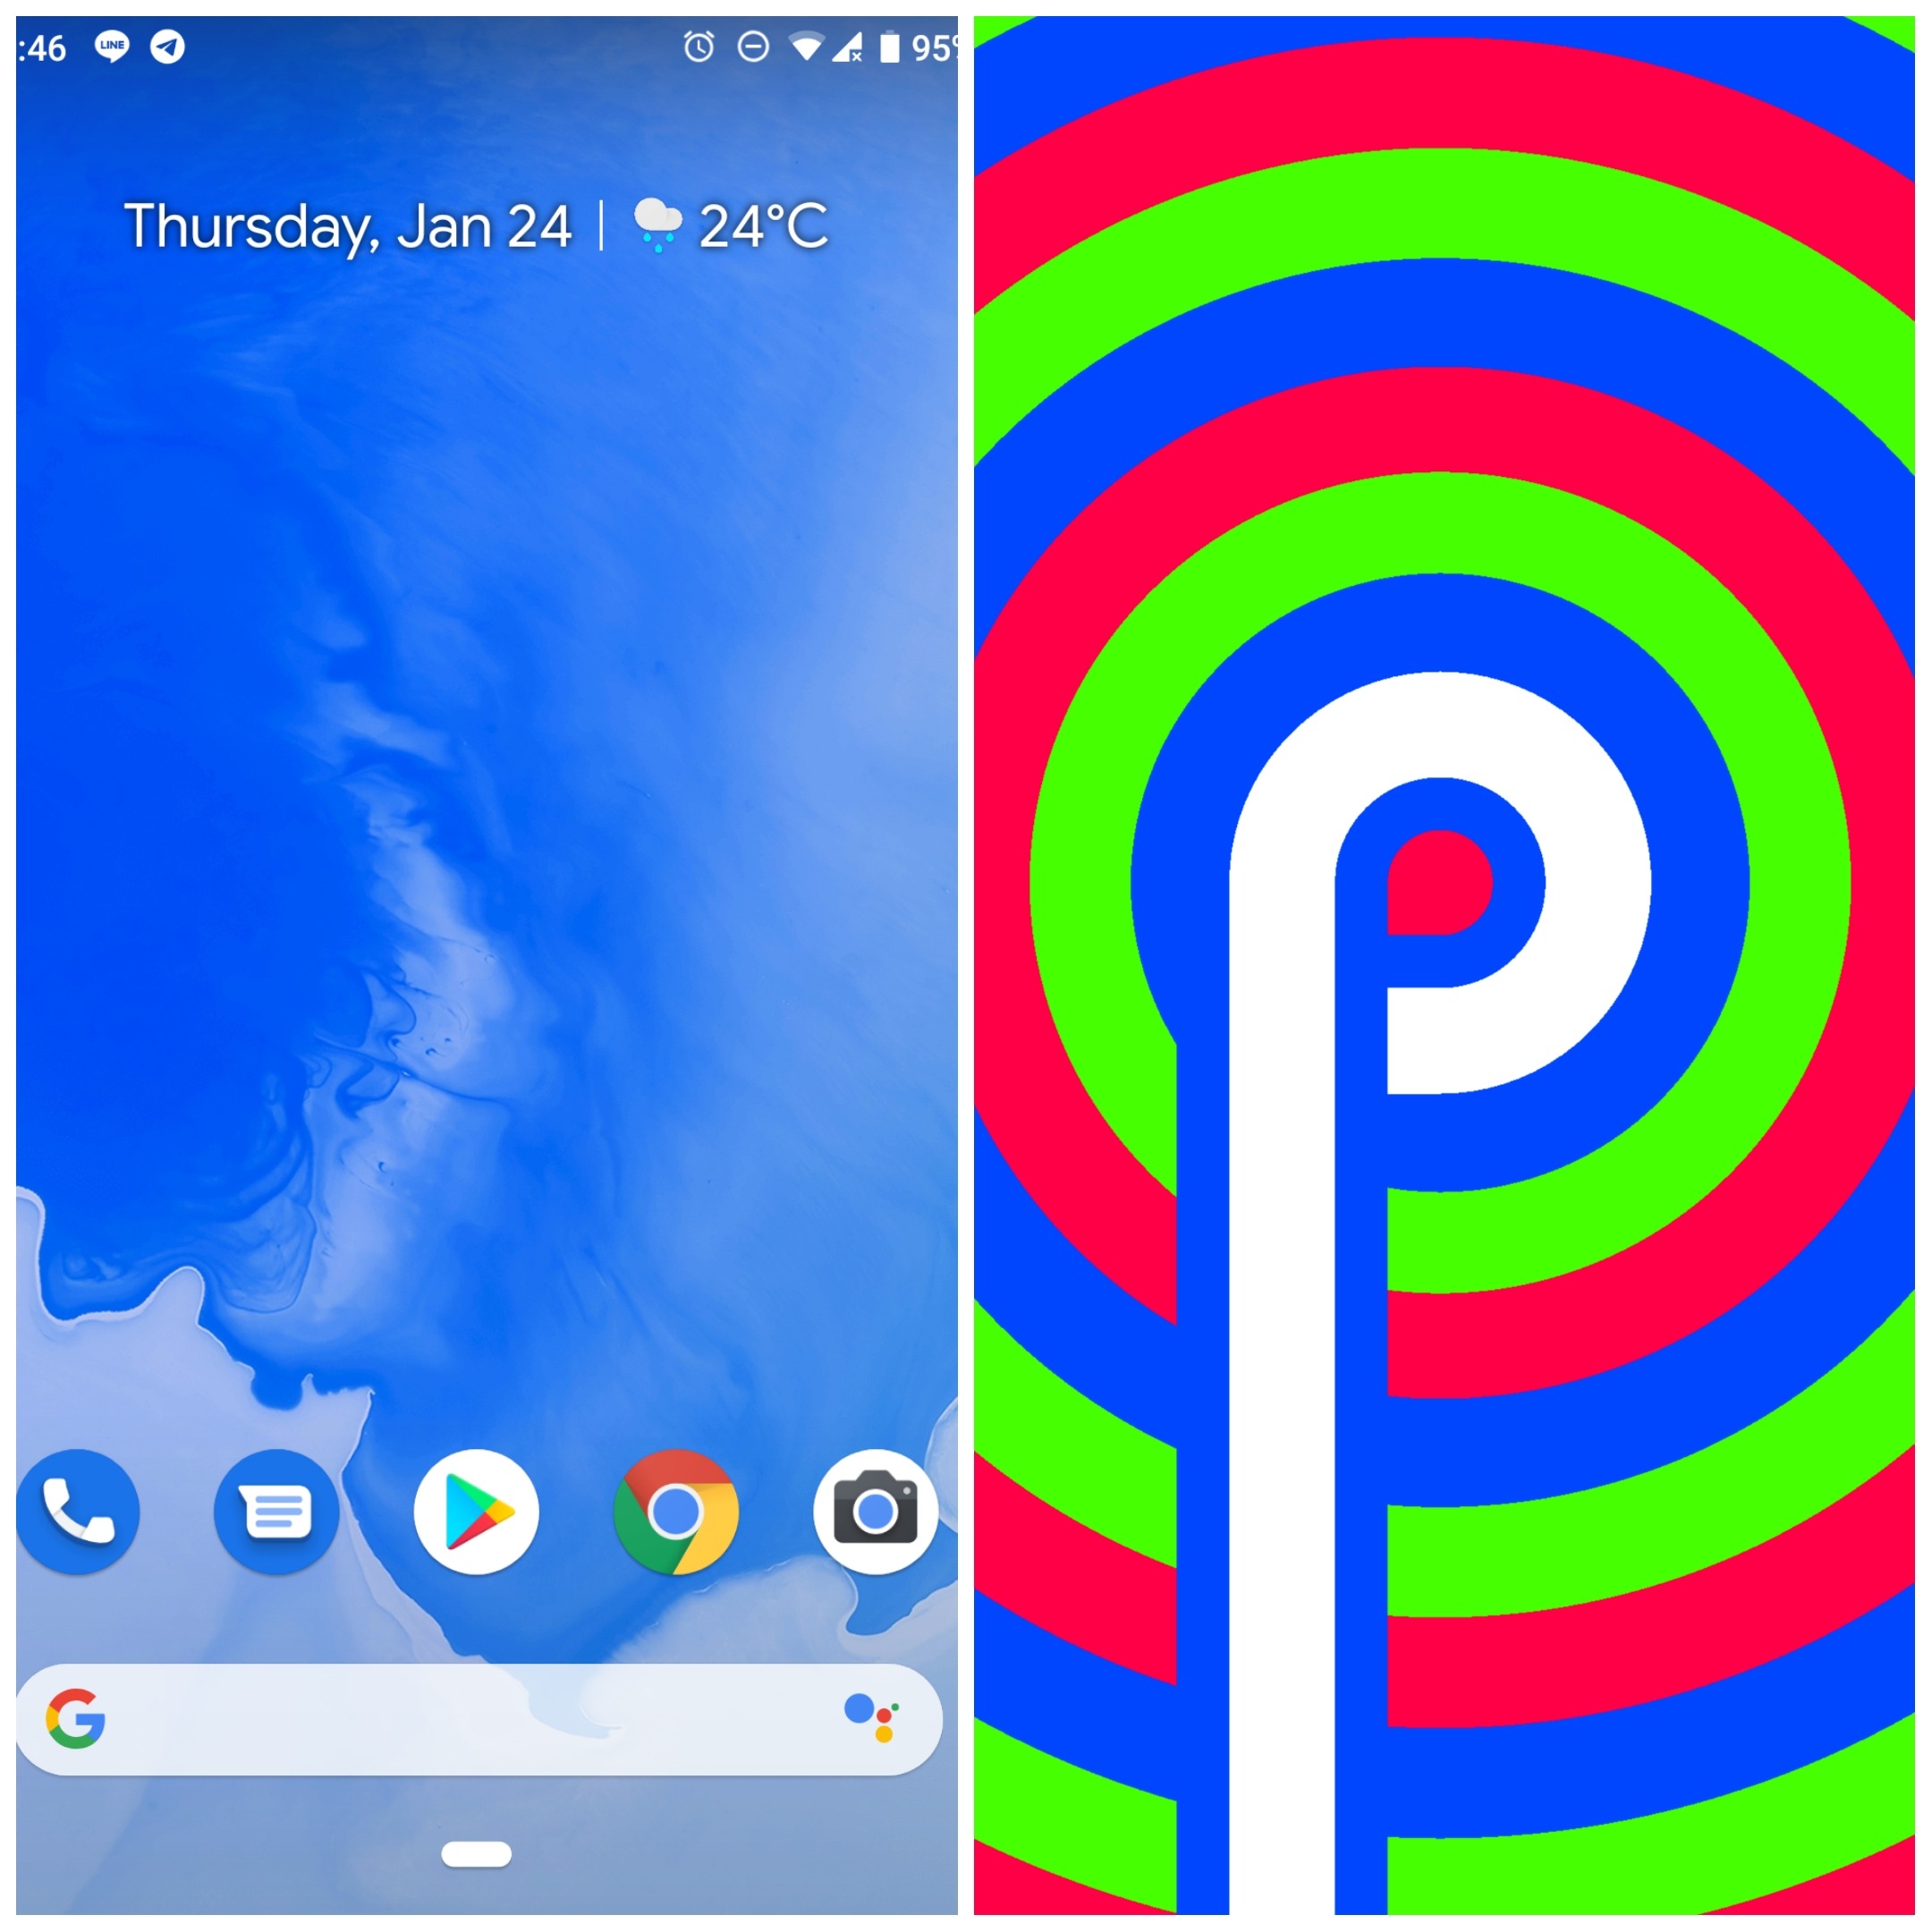 The history of Android pie